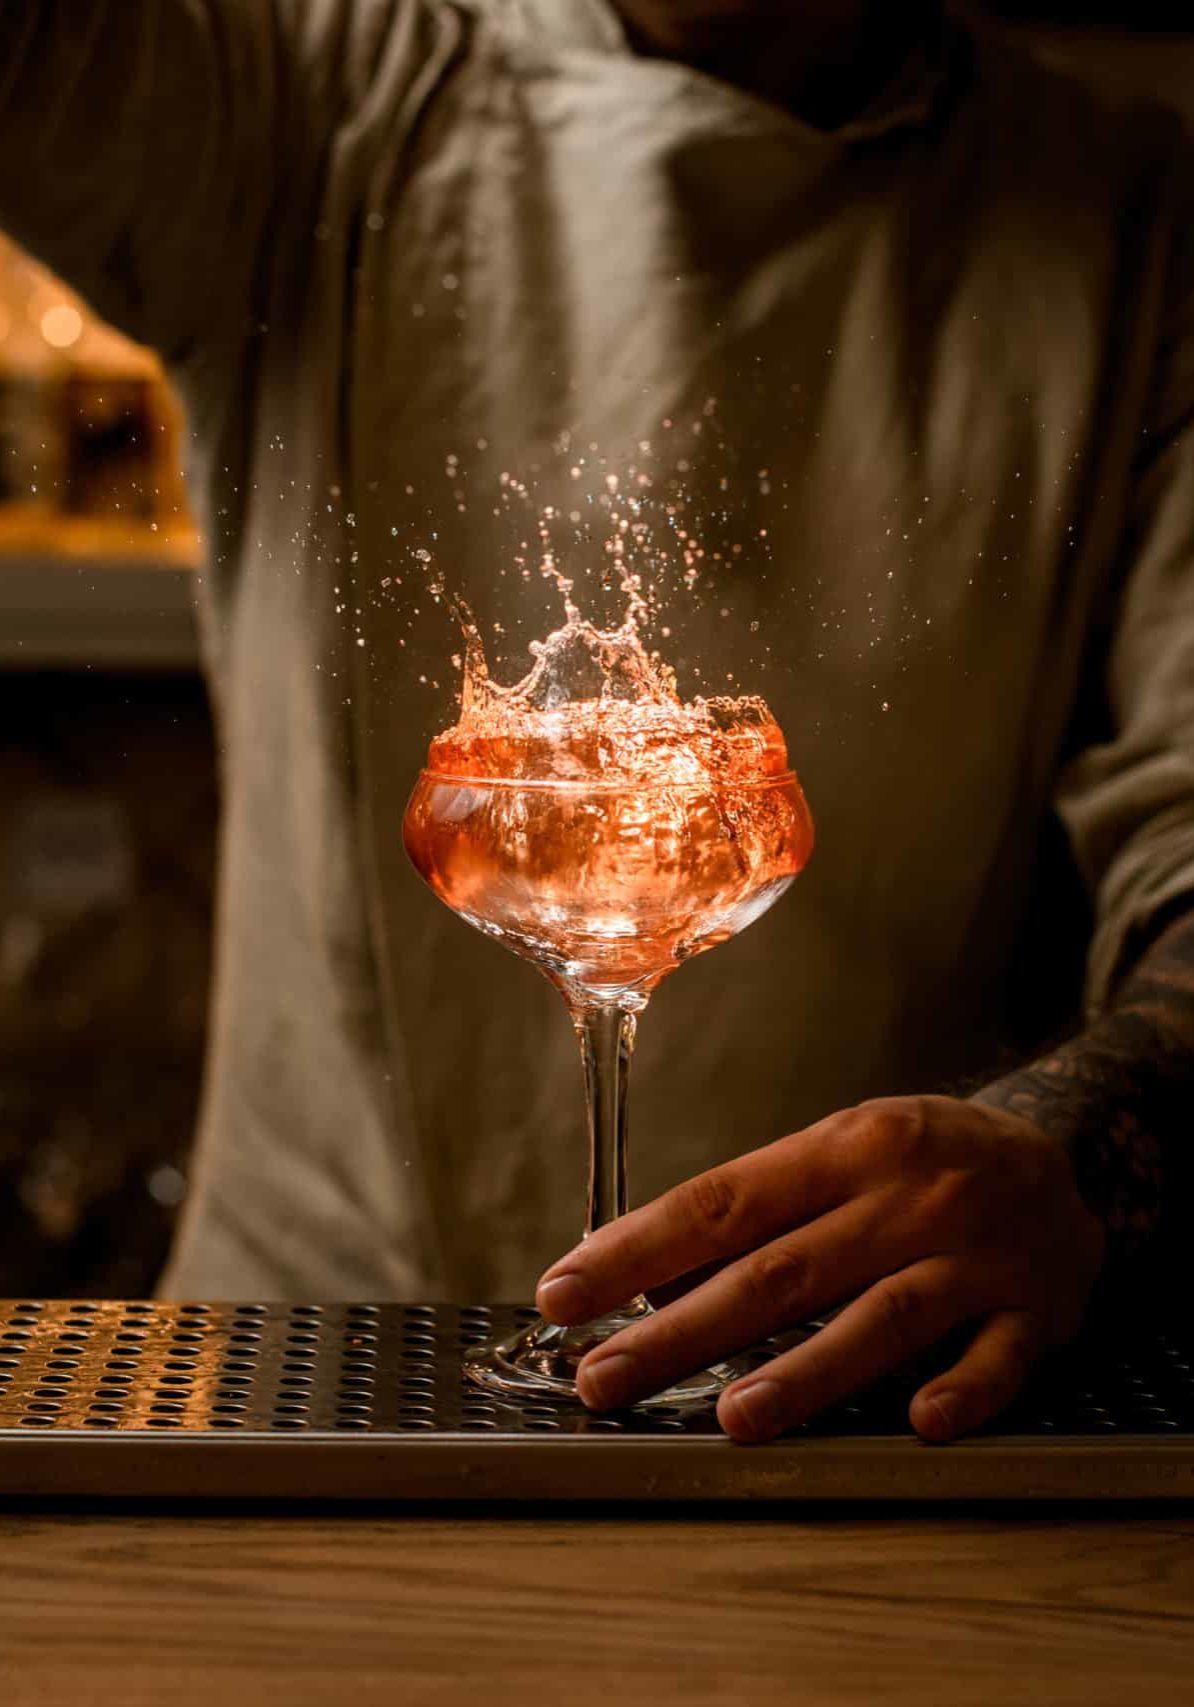 Barman's hand holds wine glass with splashes of bright cocktail which stands on the bar counter.